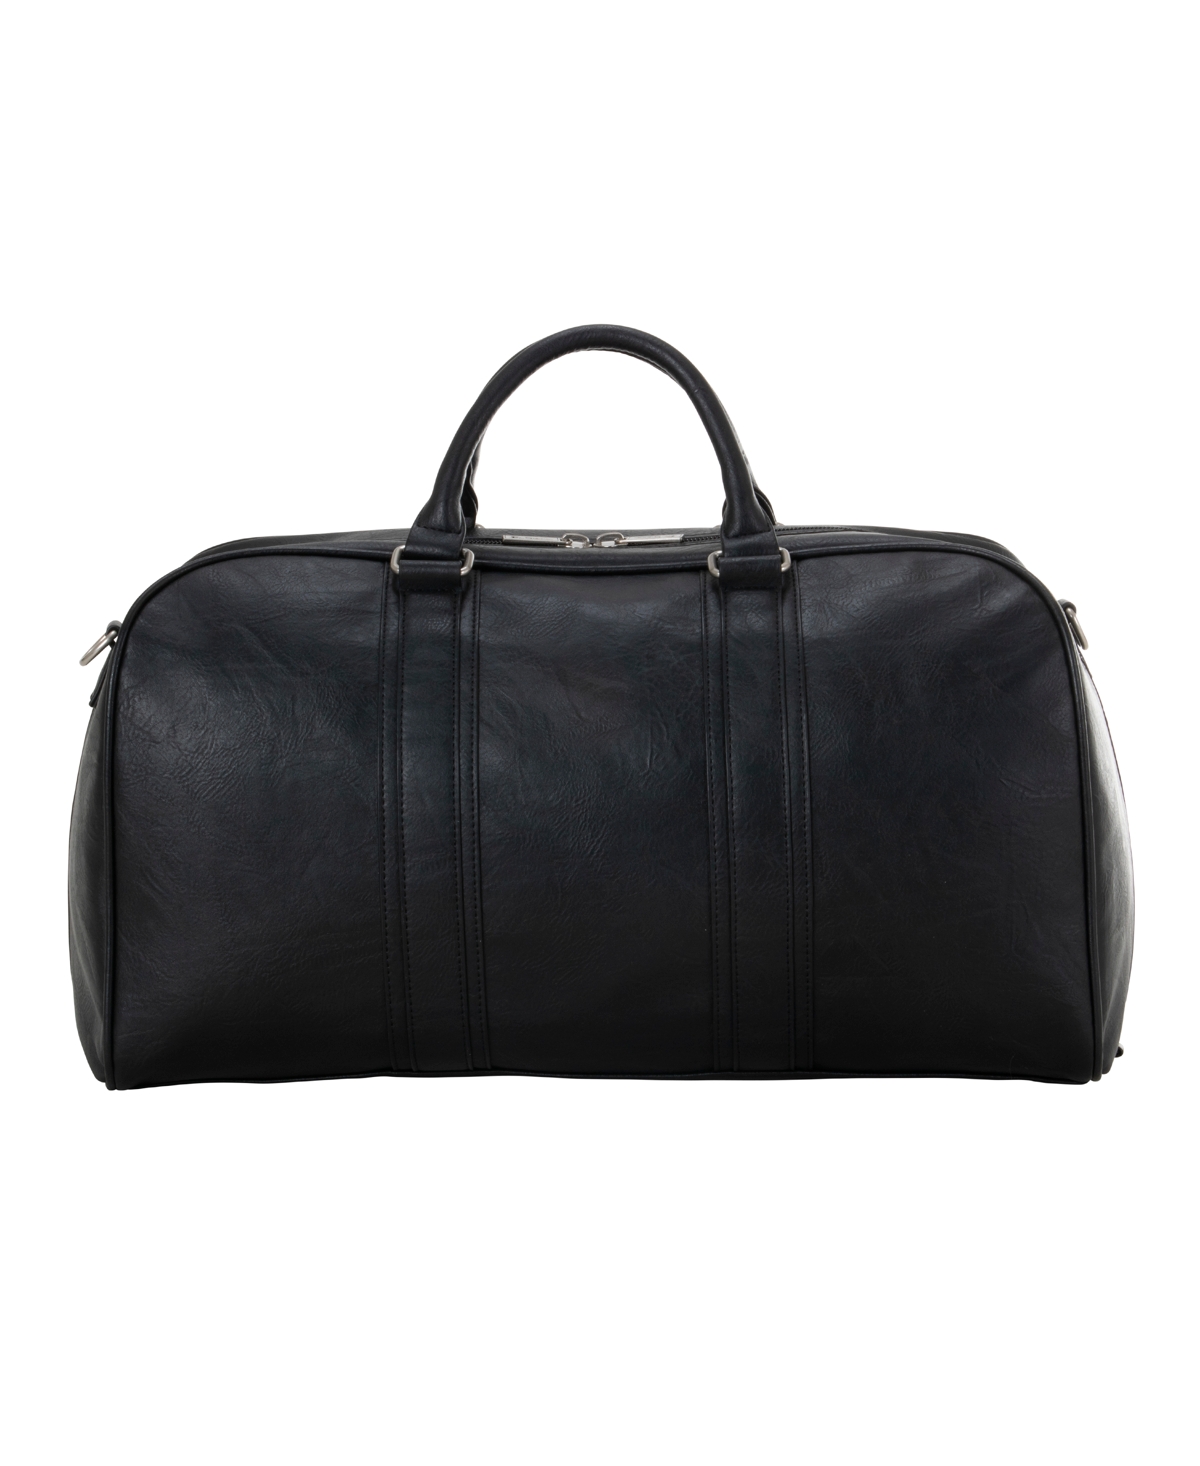 In Less Distress 20" Faux Leather Carry-On Duffel Bag - Black